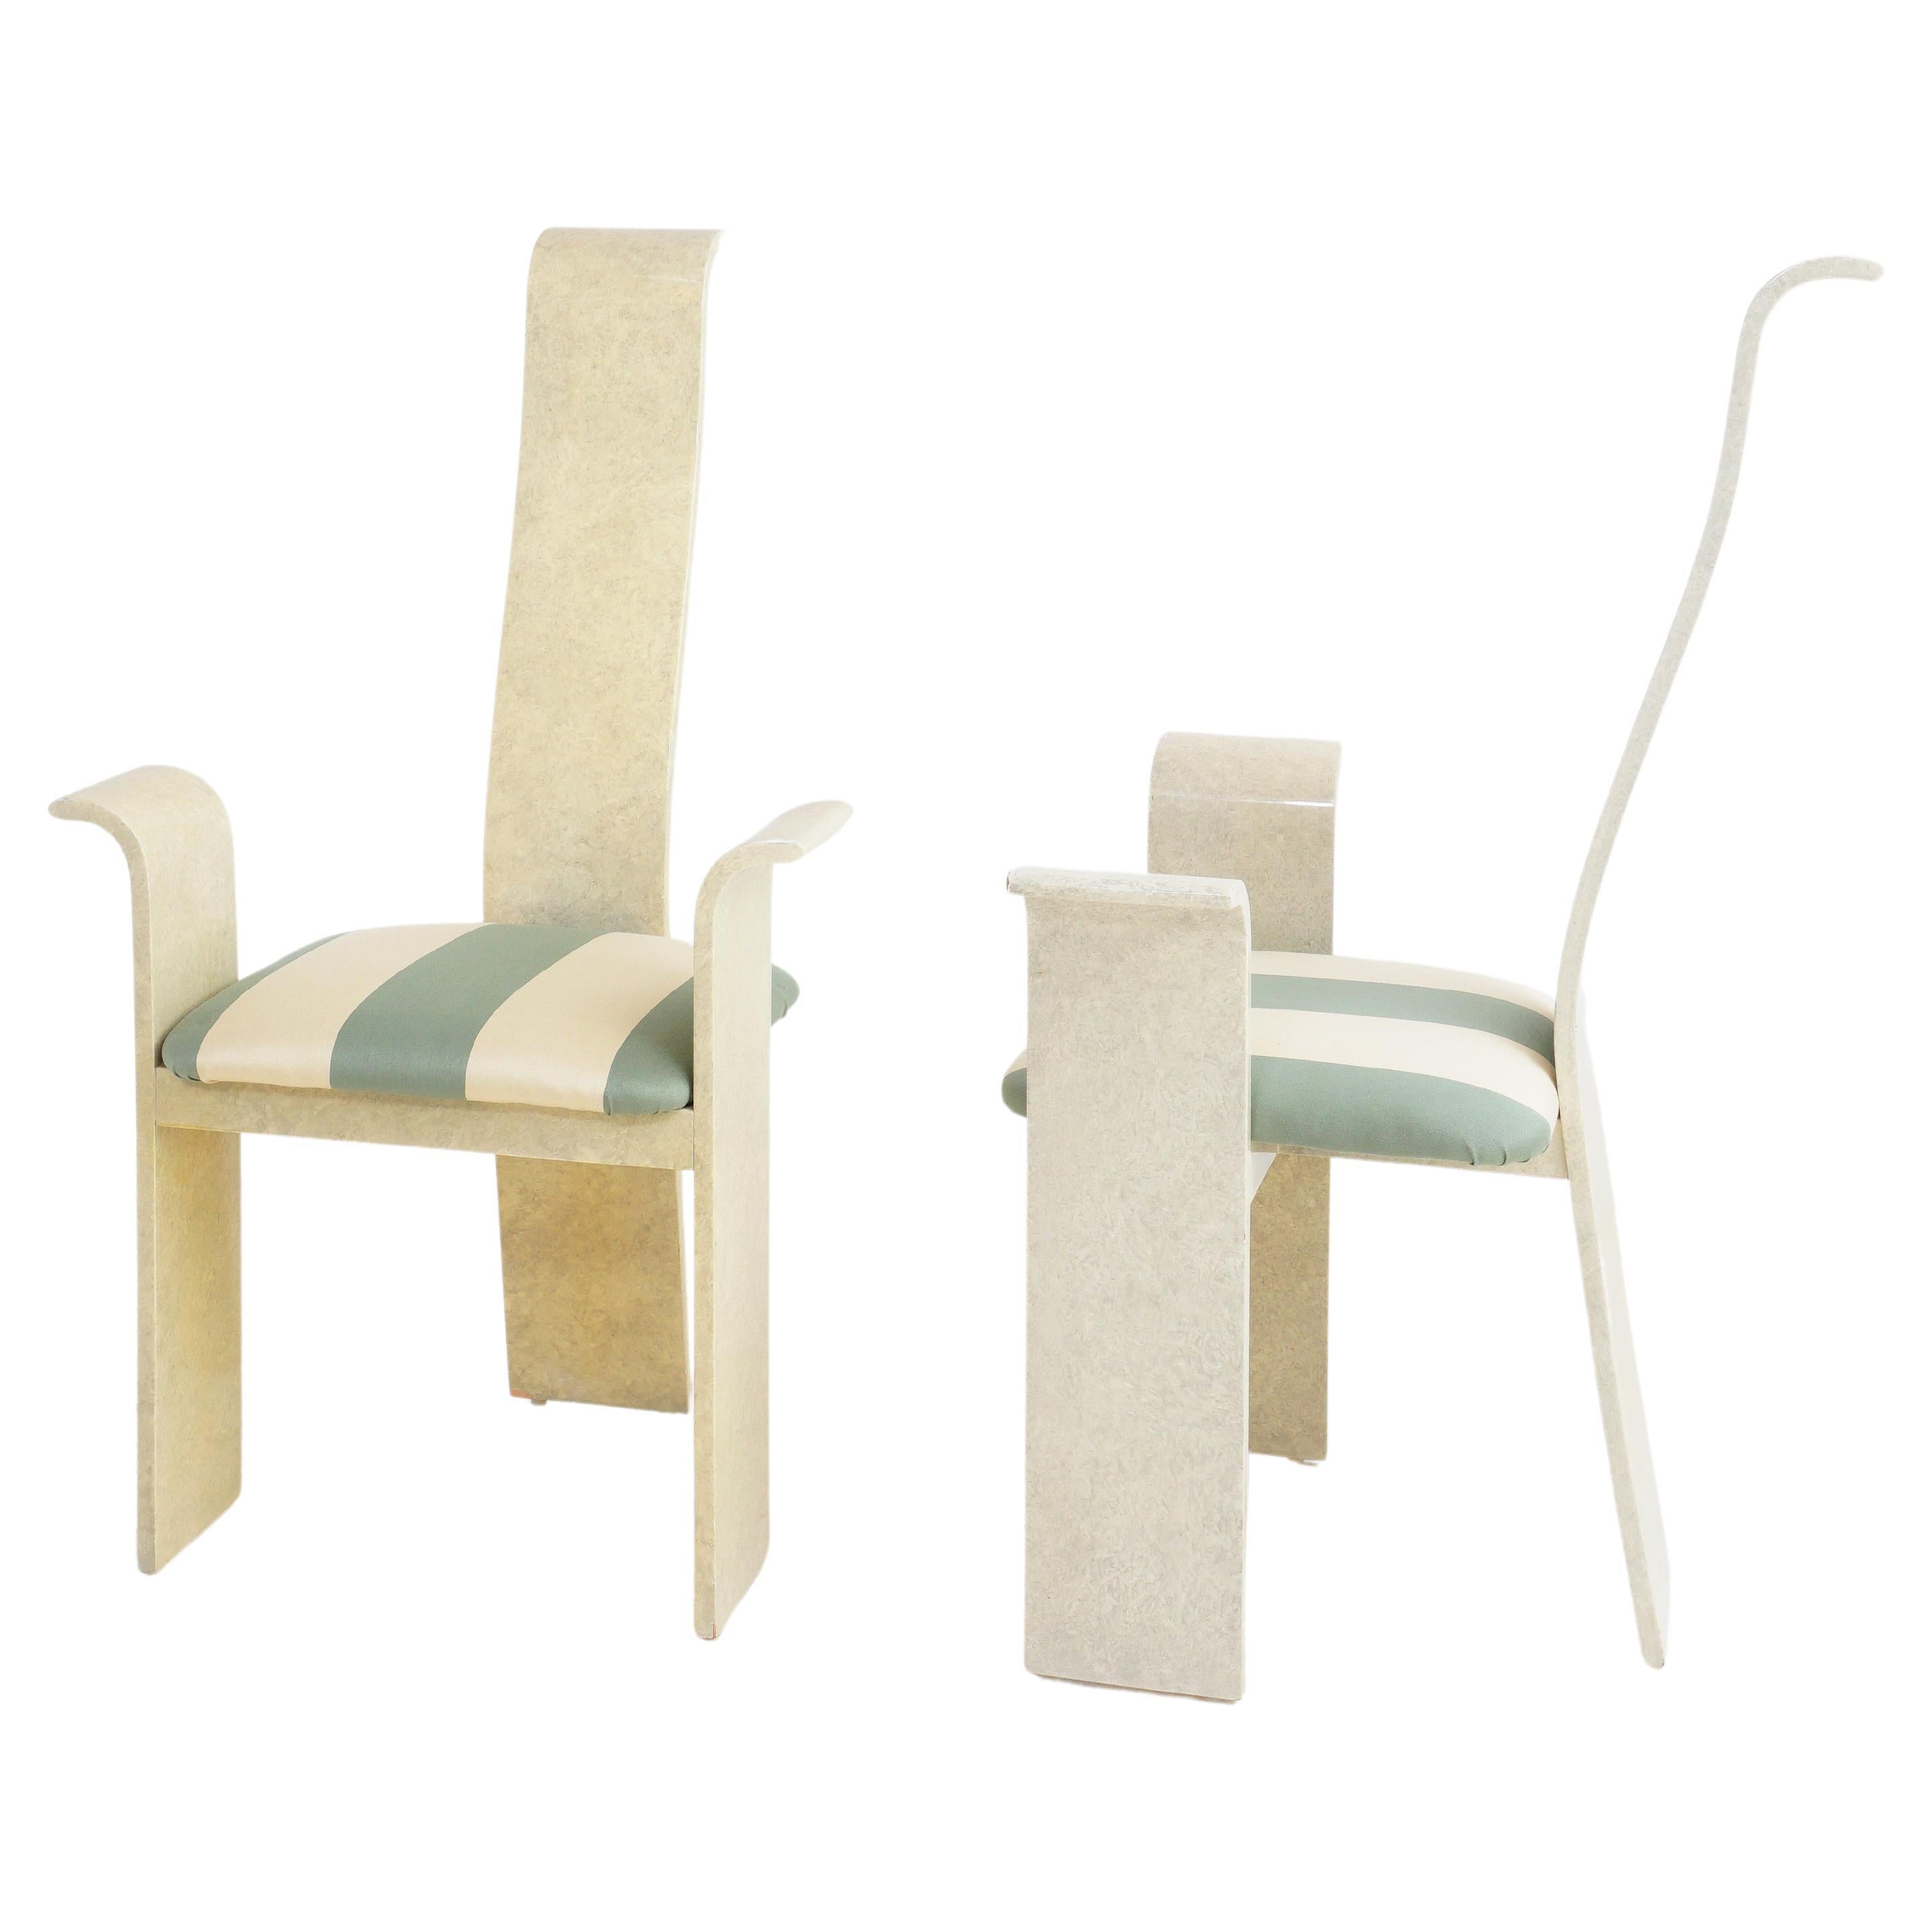 Postmodern Sculptural Dining Chair, 1980s For Sale